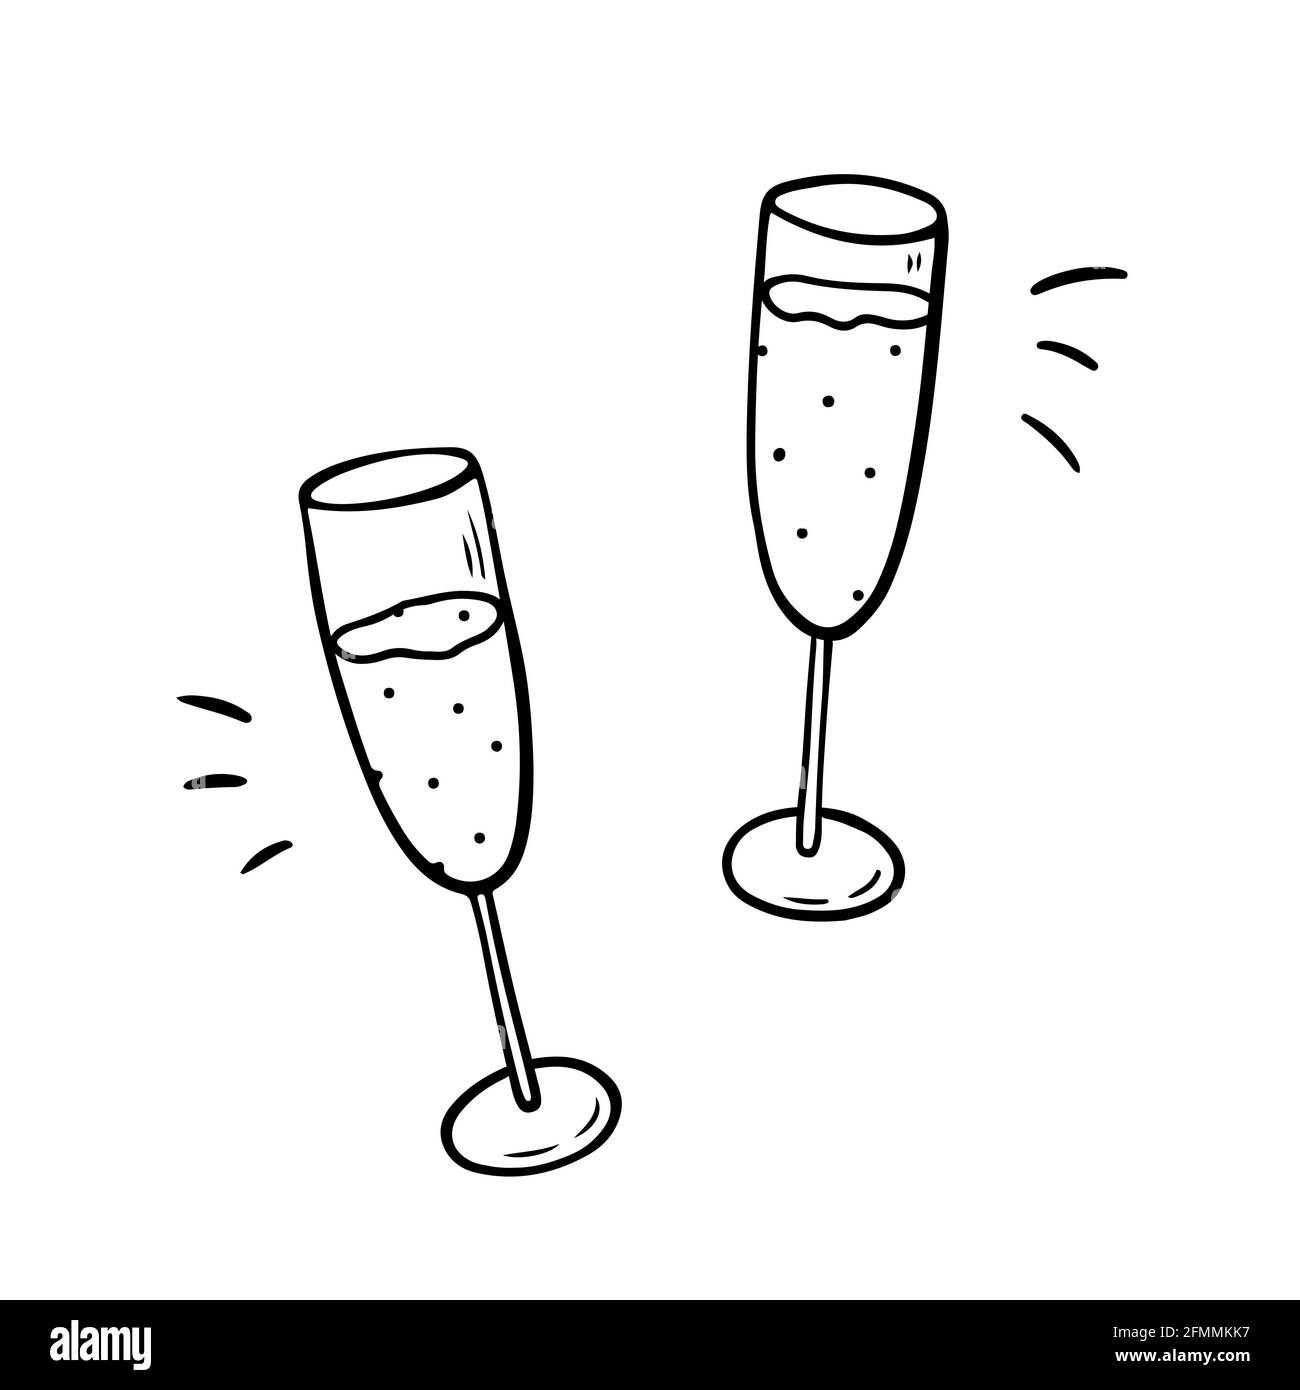 Two champagne glasses clinking Black and White Stock Photos & Images - Alamy